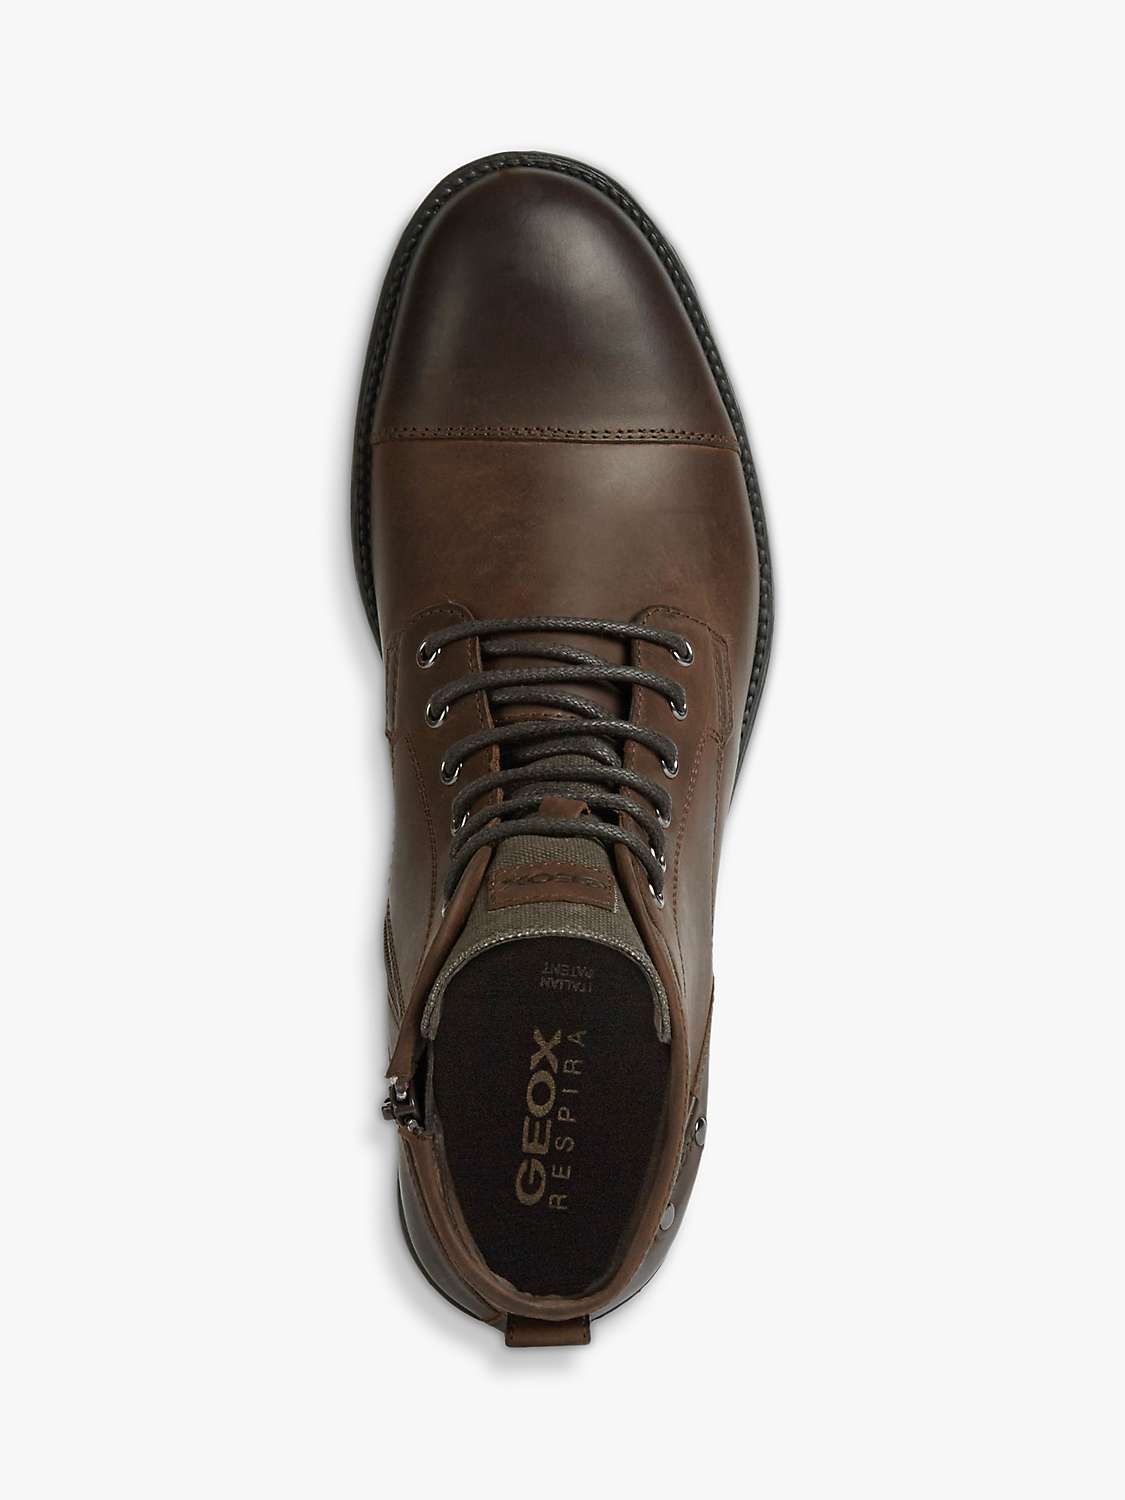 seinpaal halen koffer Geox Jaylon Leather Lace Up Ankle Boots, Dark Brown at John Lewis & Partners